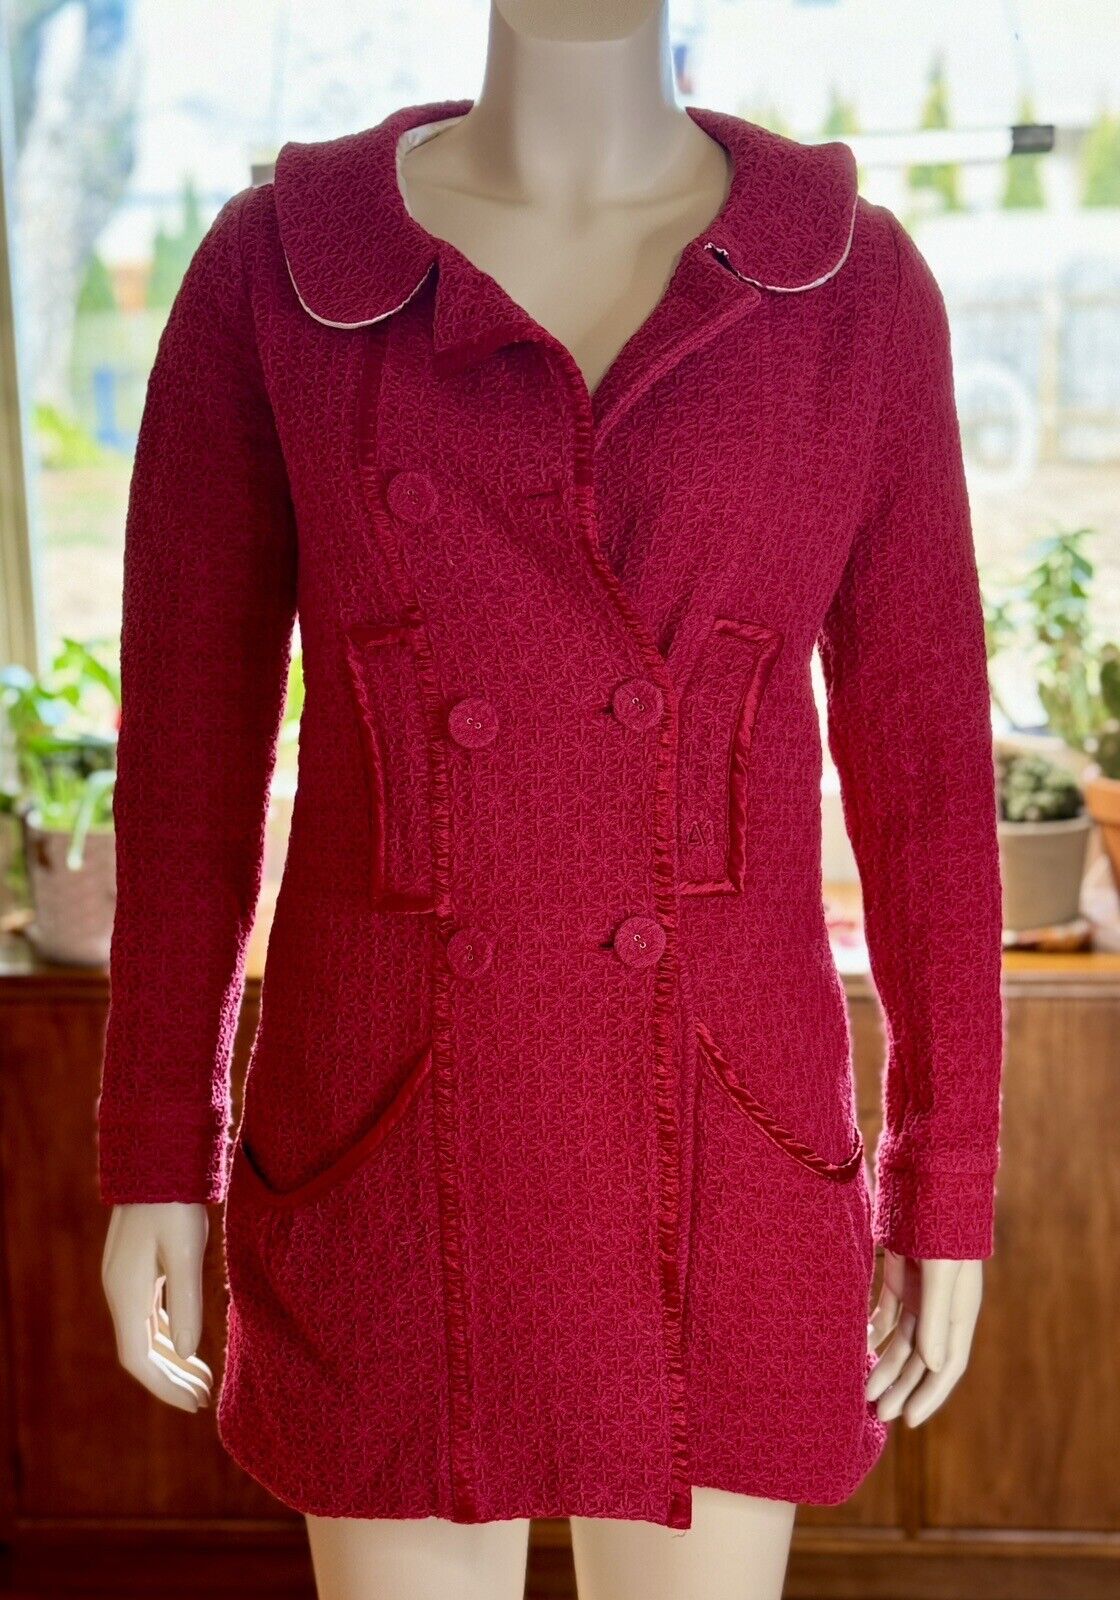 VINTAGE Mod MATIX Red Double Breasted Women’s Coat - Size XS/S